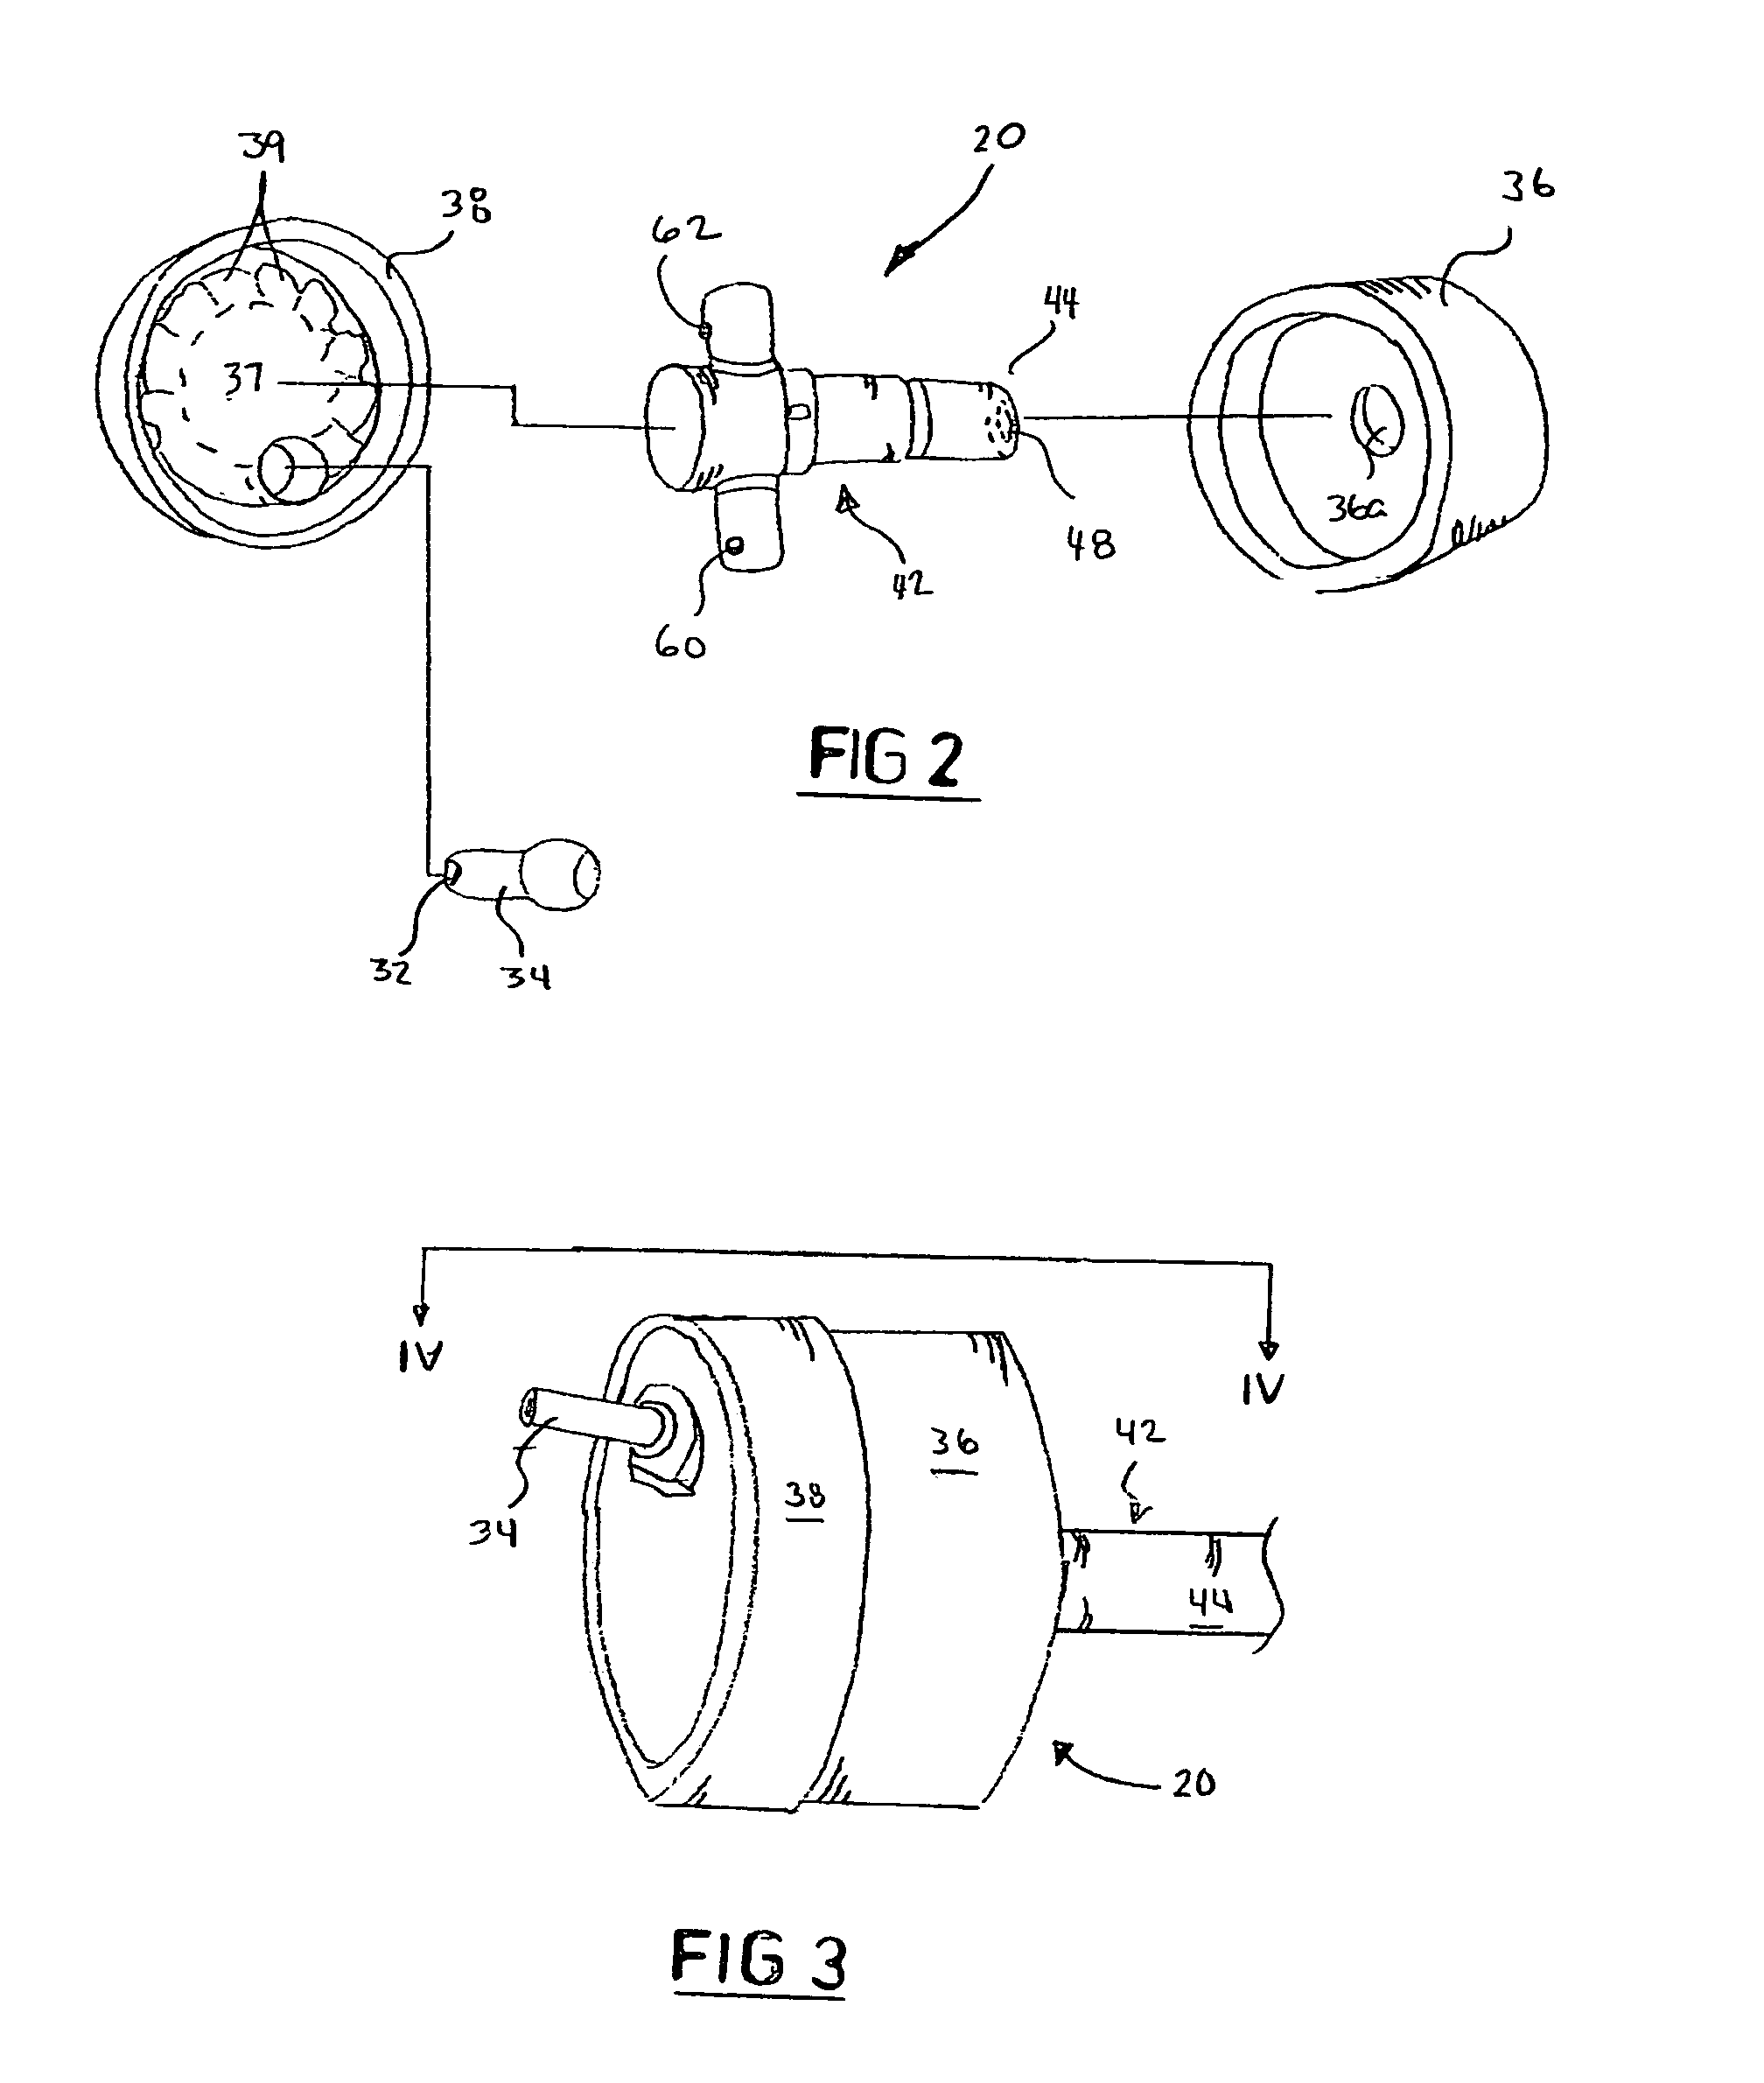 Water gun amusement devices and methods of using the same